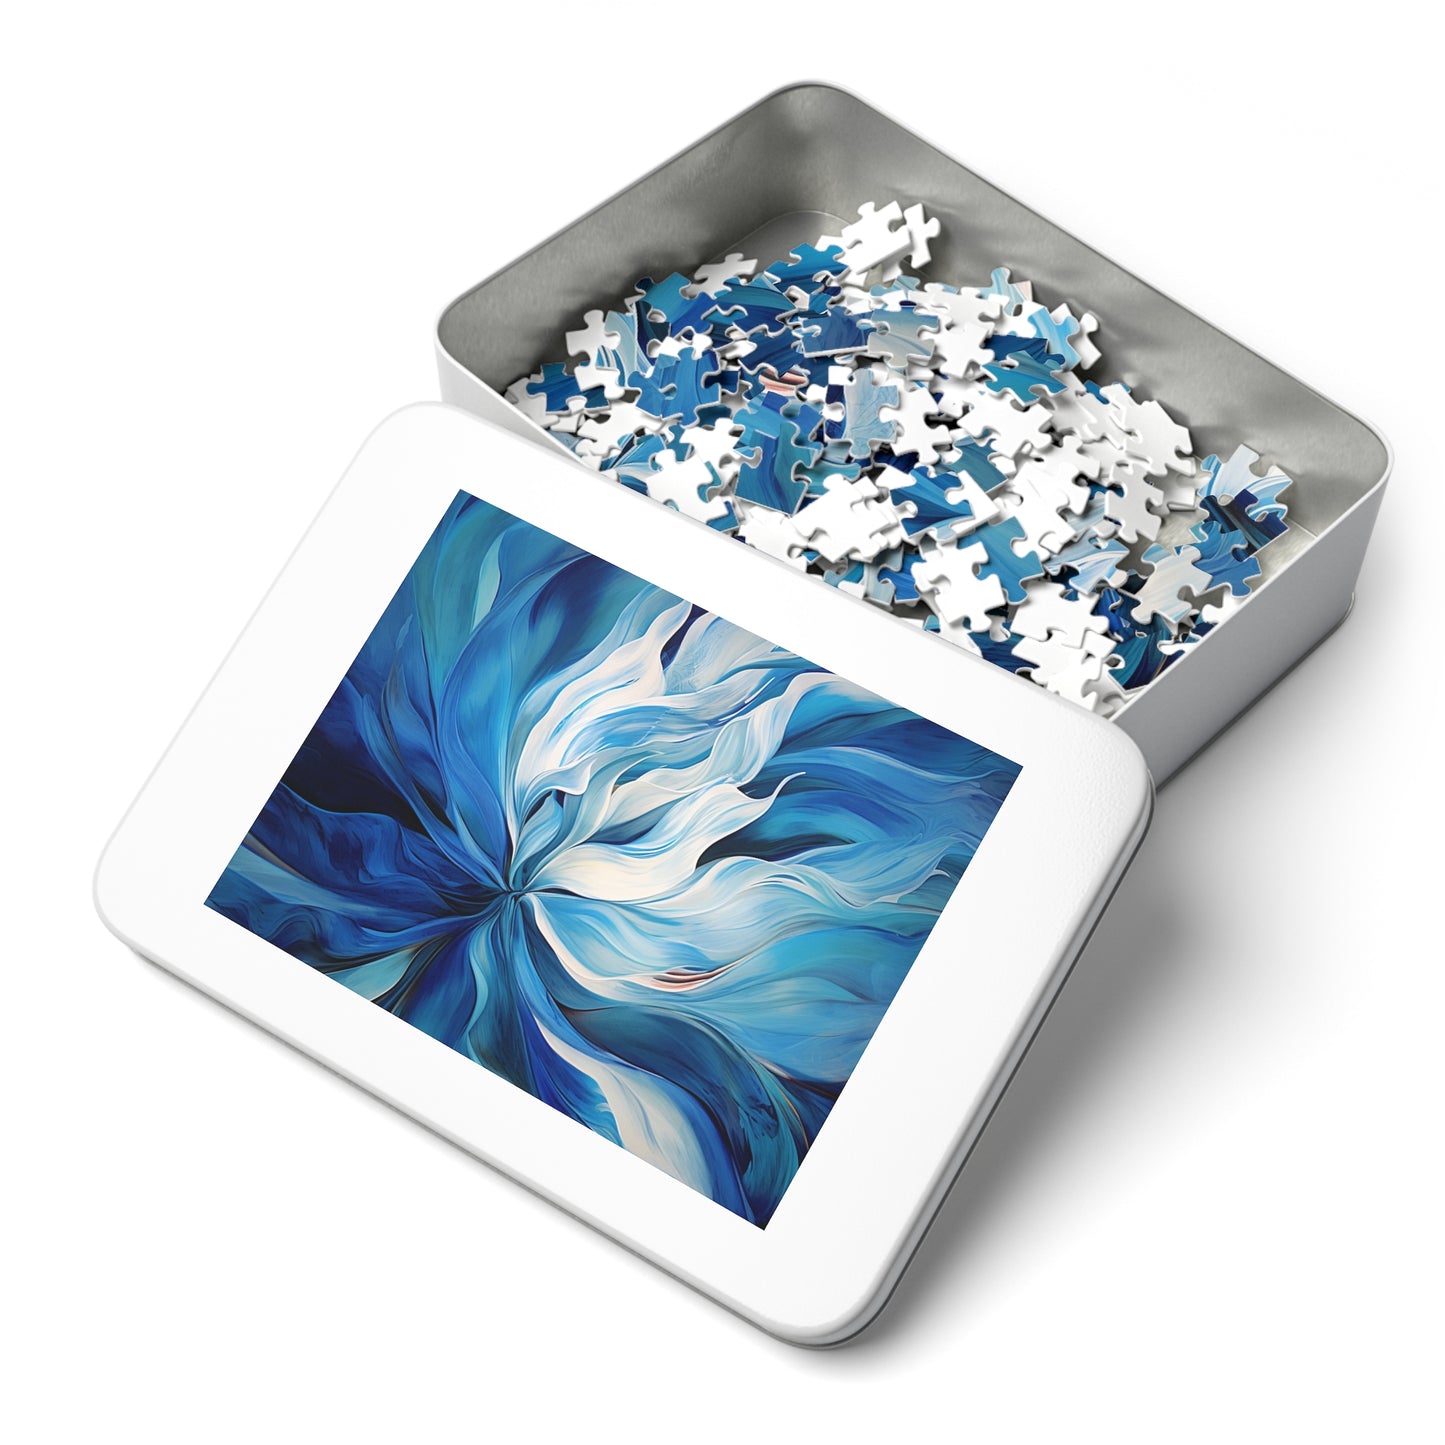 Jigsaw Puzzle (30, 110, 252, 500,1000-Piece) Blue Tluip Abstract 1